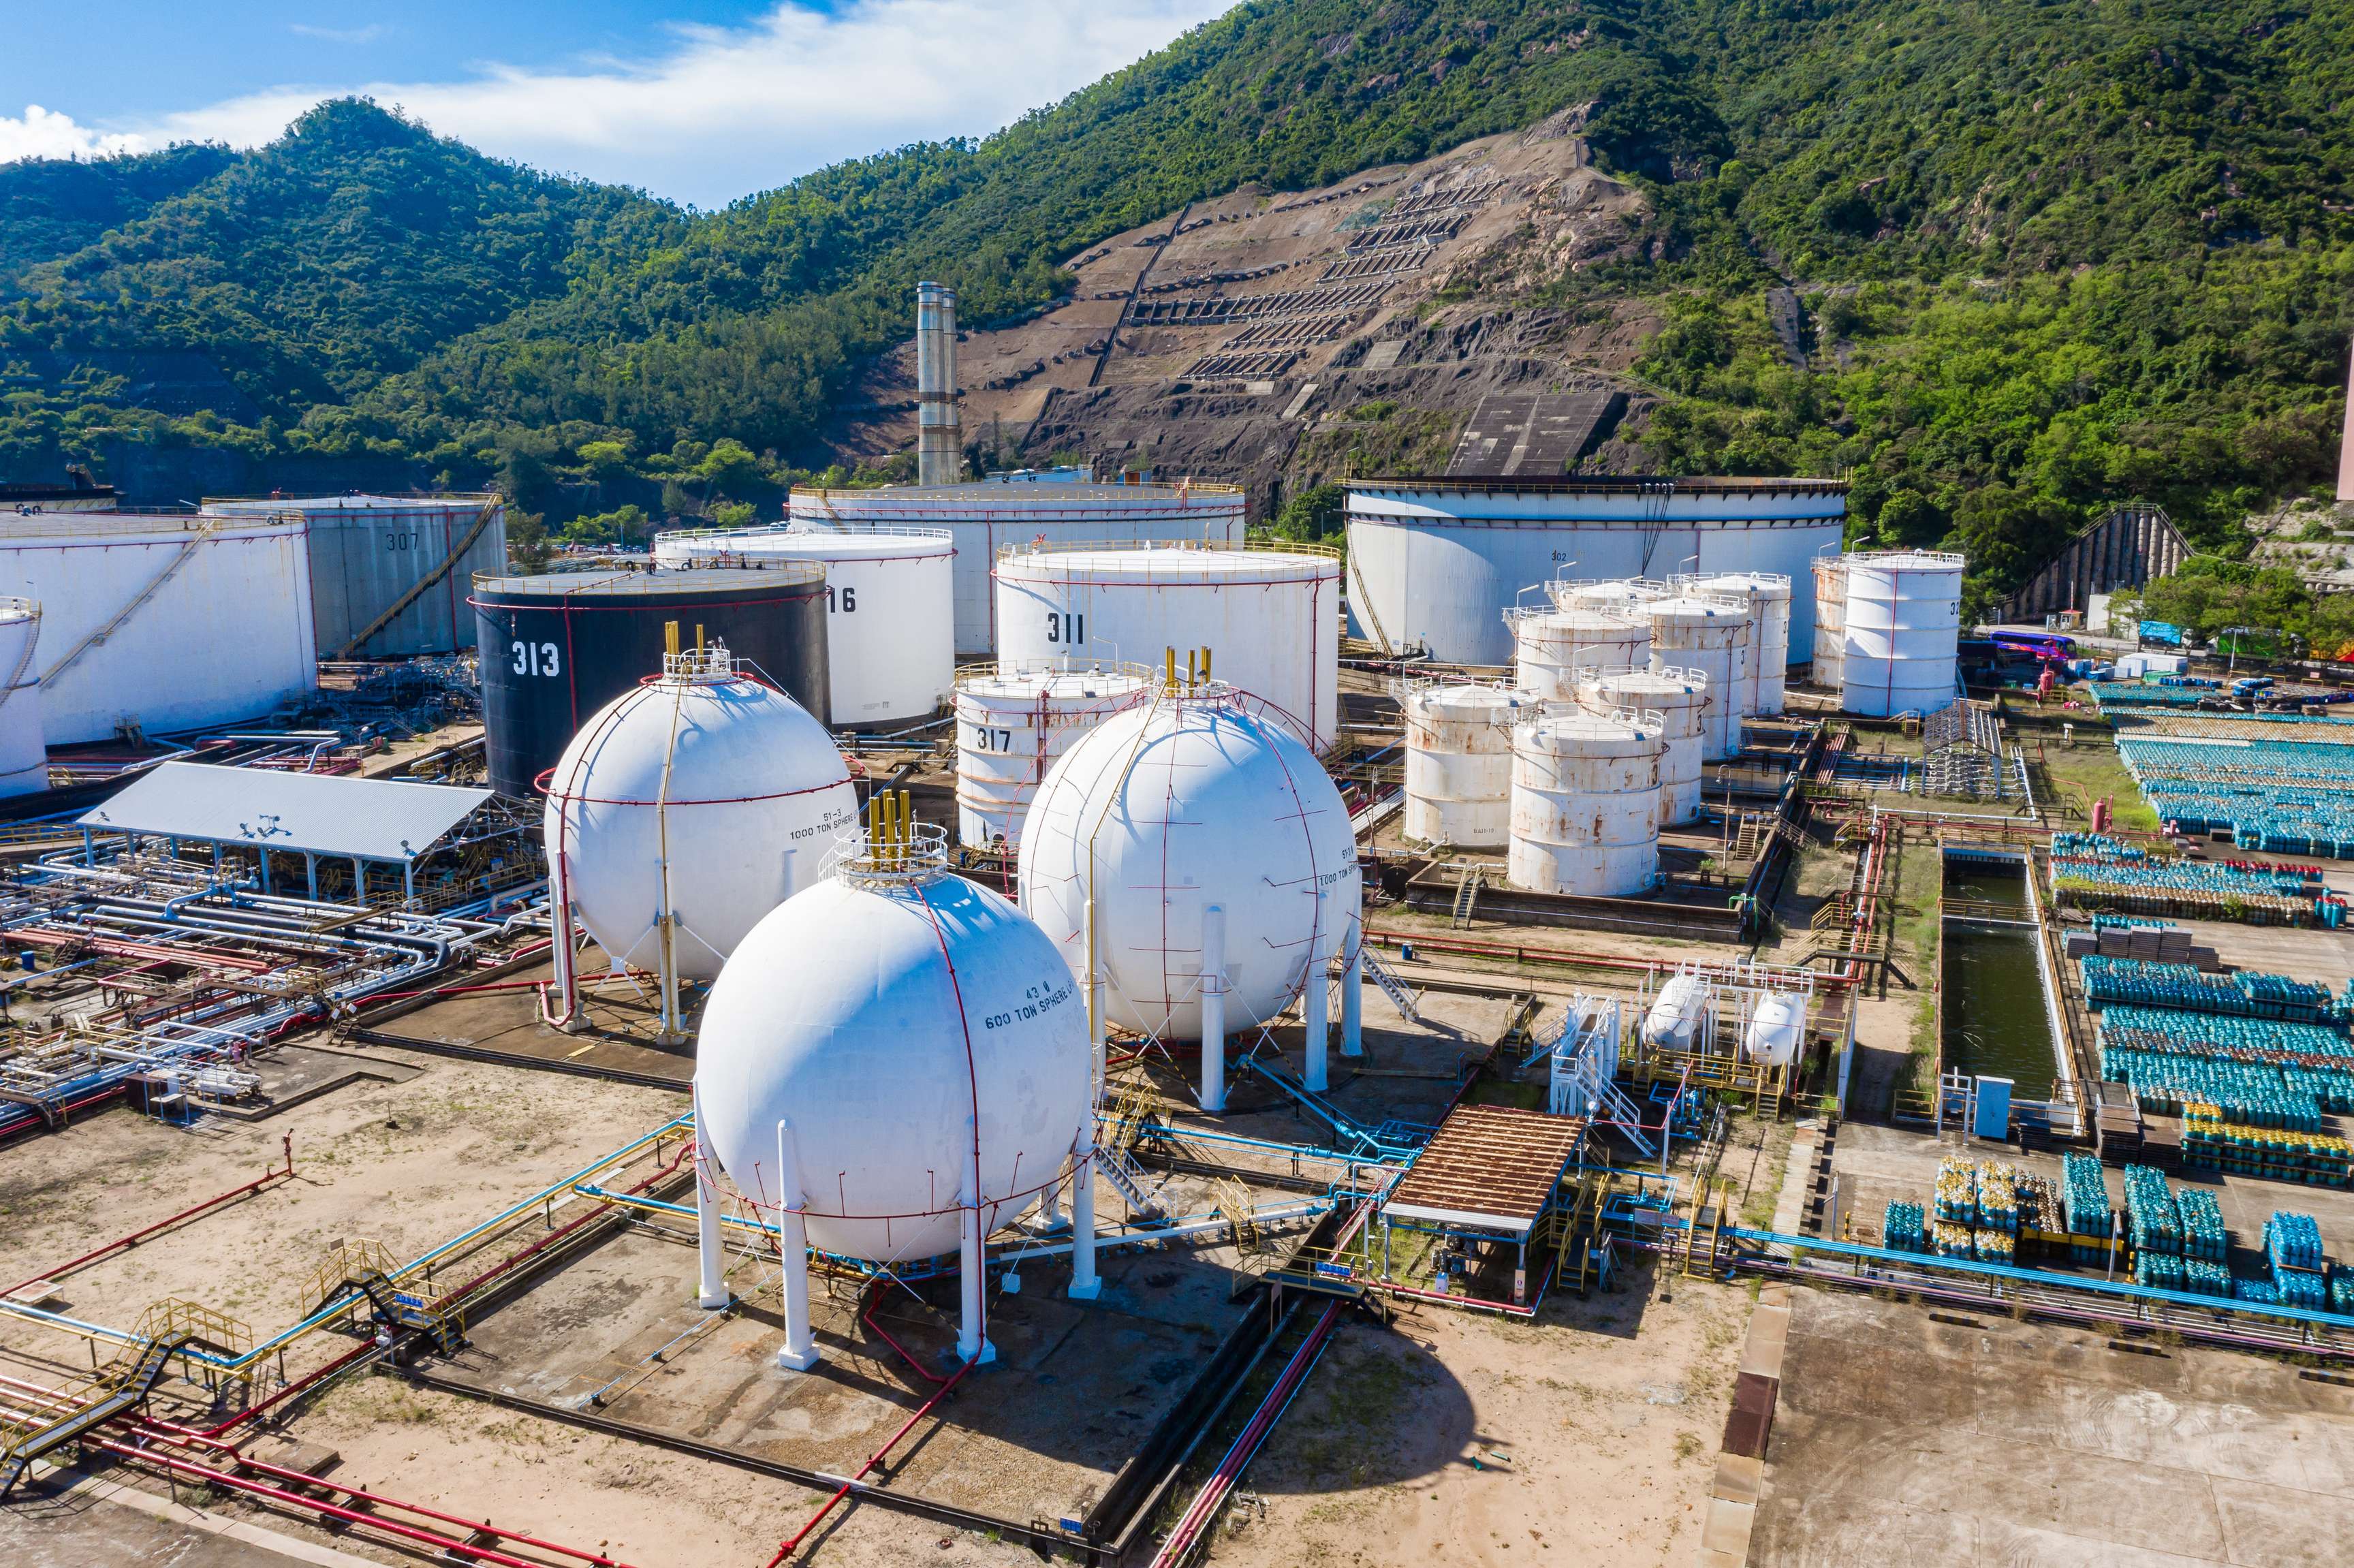 Tank farm with pressure vessels in the foreground and green mountain in the background.